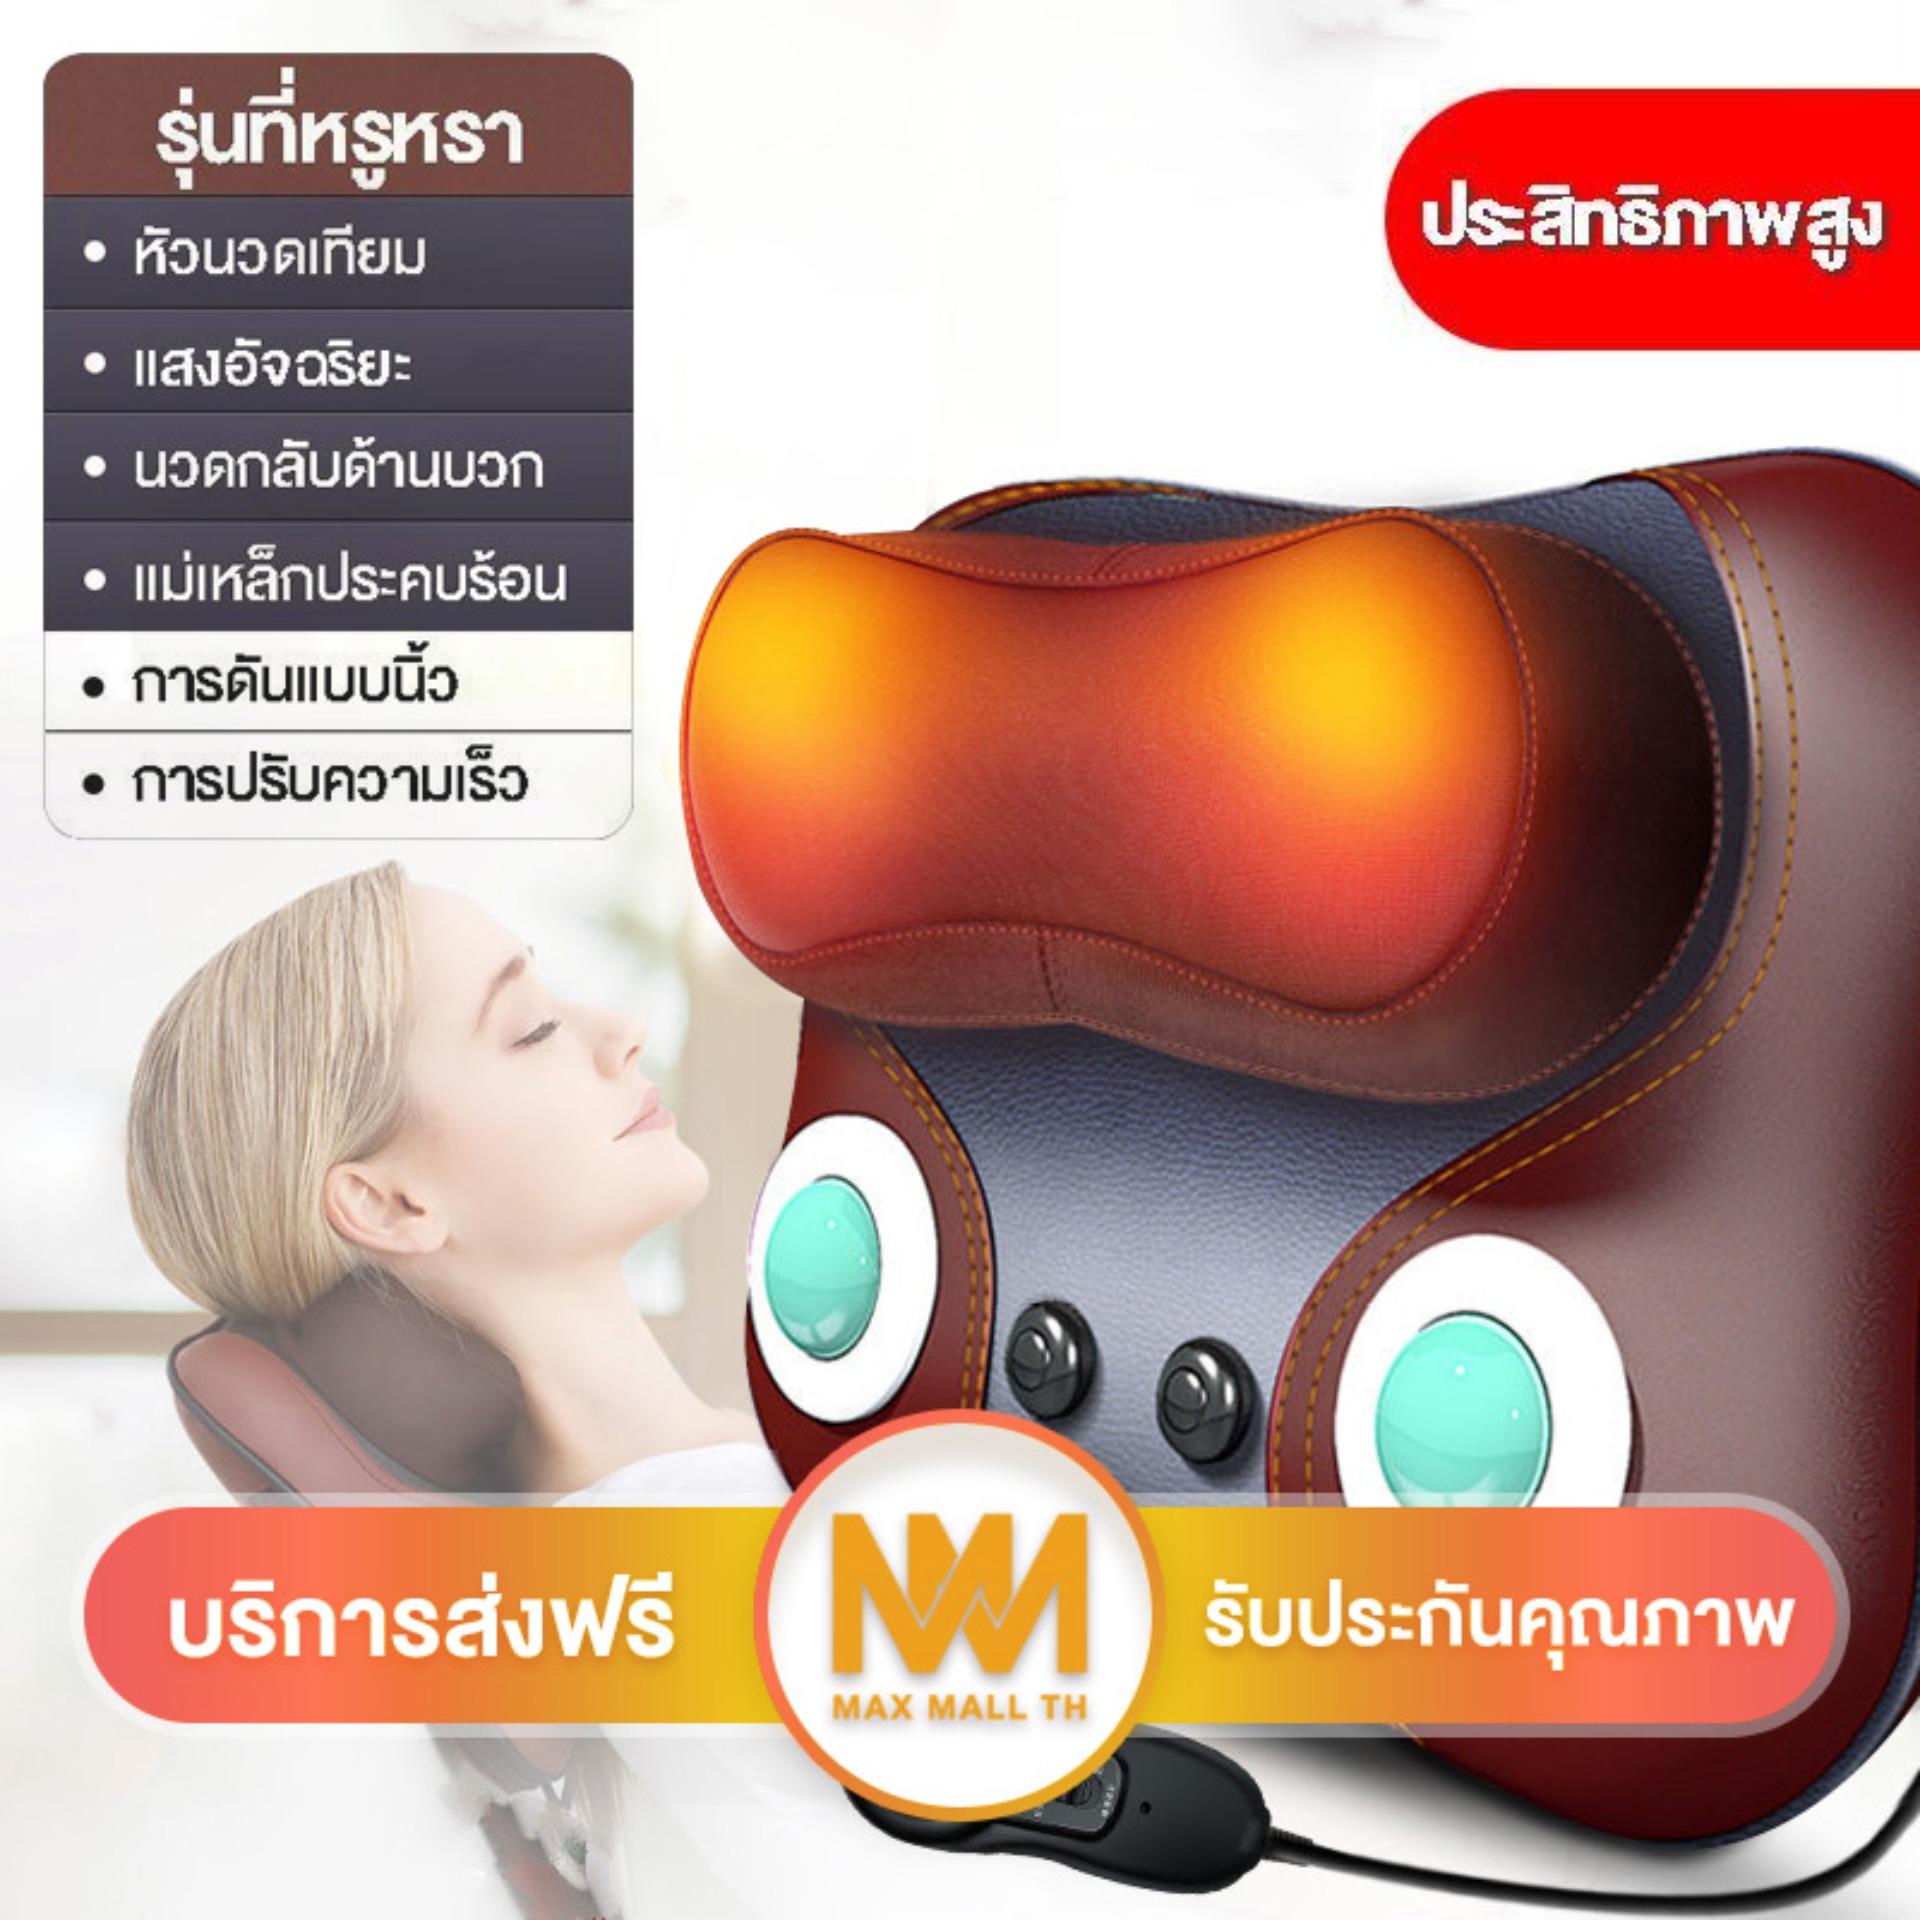 Max Mall หมอนนวดไฟฟ้า หมอนนวดคอและไหล่ หมอนนวดอเนกประสงค์ เบาะนวดไฟฟ้า Massage Pillow Shoulder and cervical massage pillow multifunctional cervical, lumbar, shoulder, electric household physiotherapy pillow, whole body, back, neck and shoulder